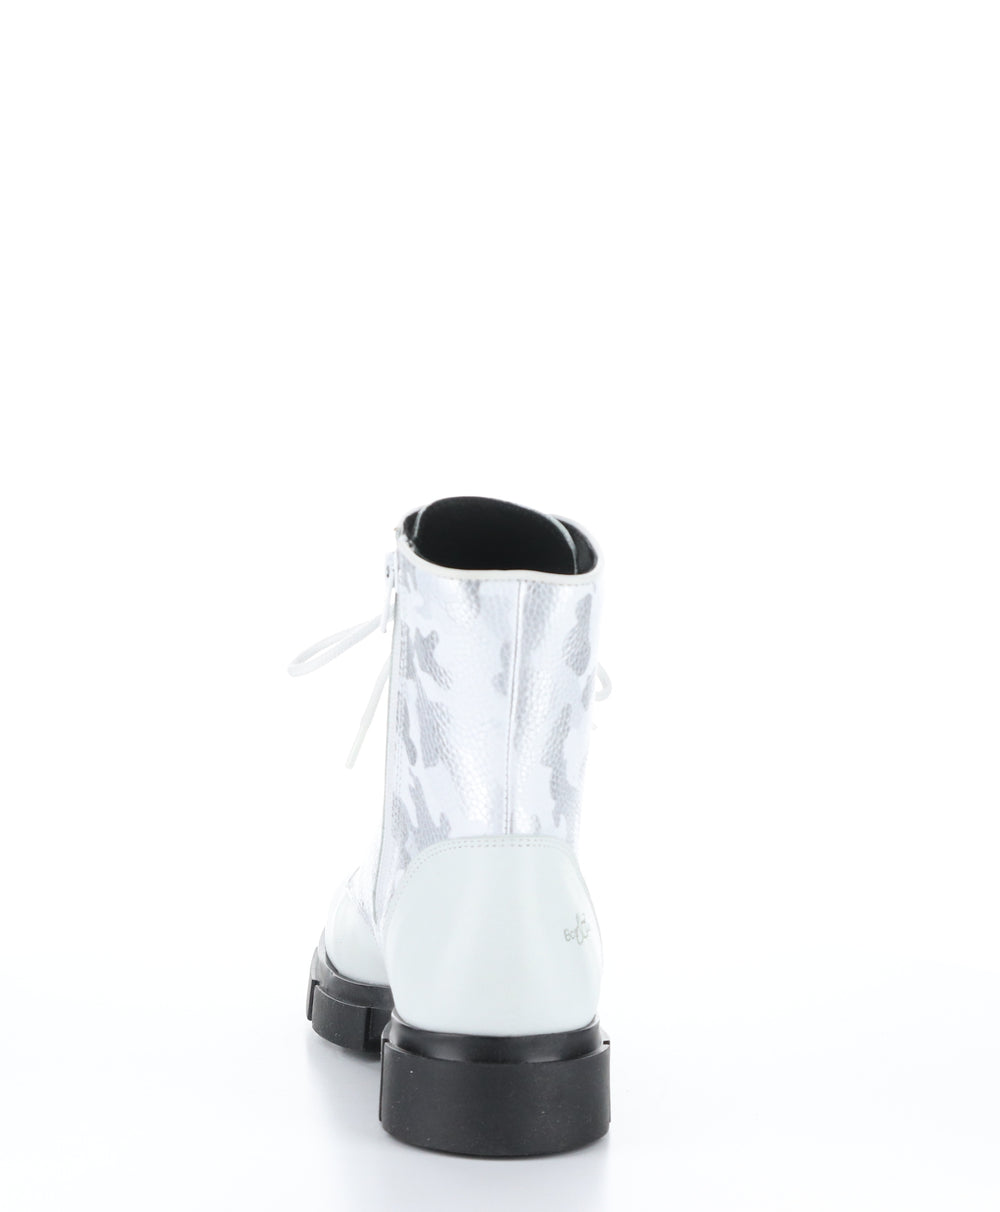 LUCK White/White/Silver Zip Up Boots|LUCK Bottes avec Fermeture Zippée in Blanc